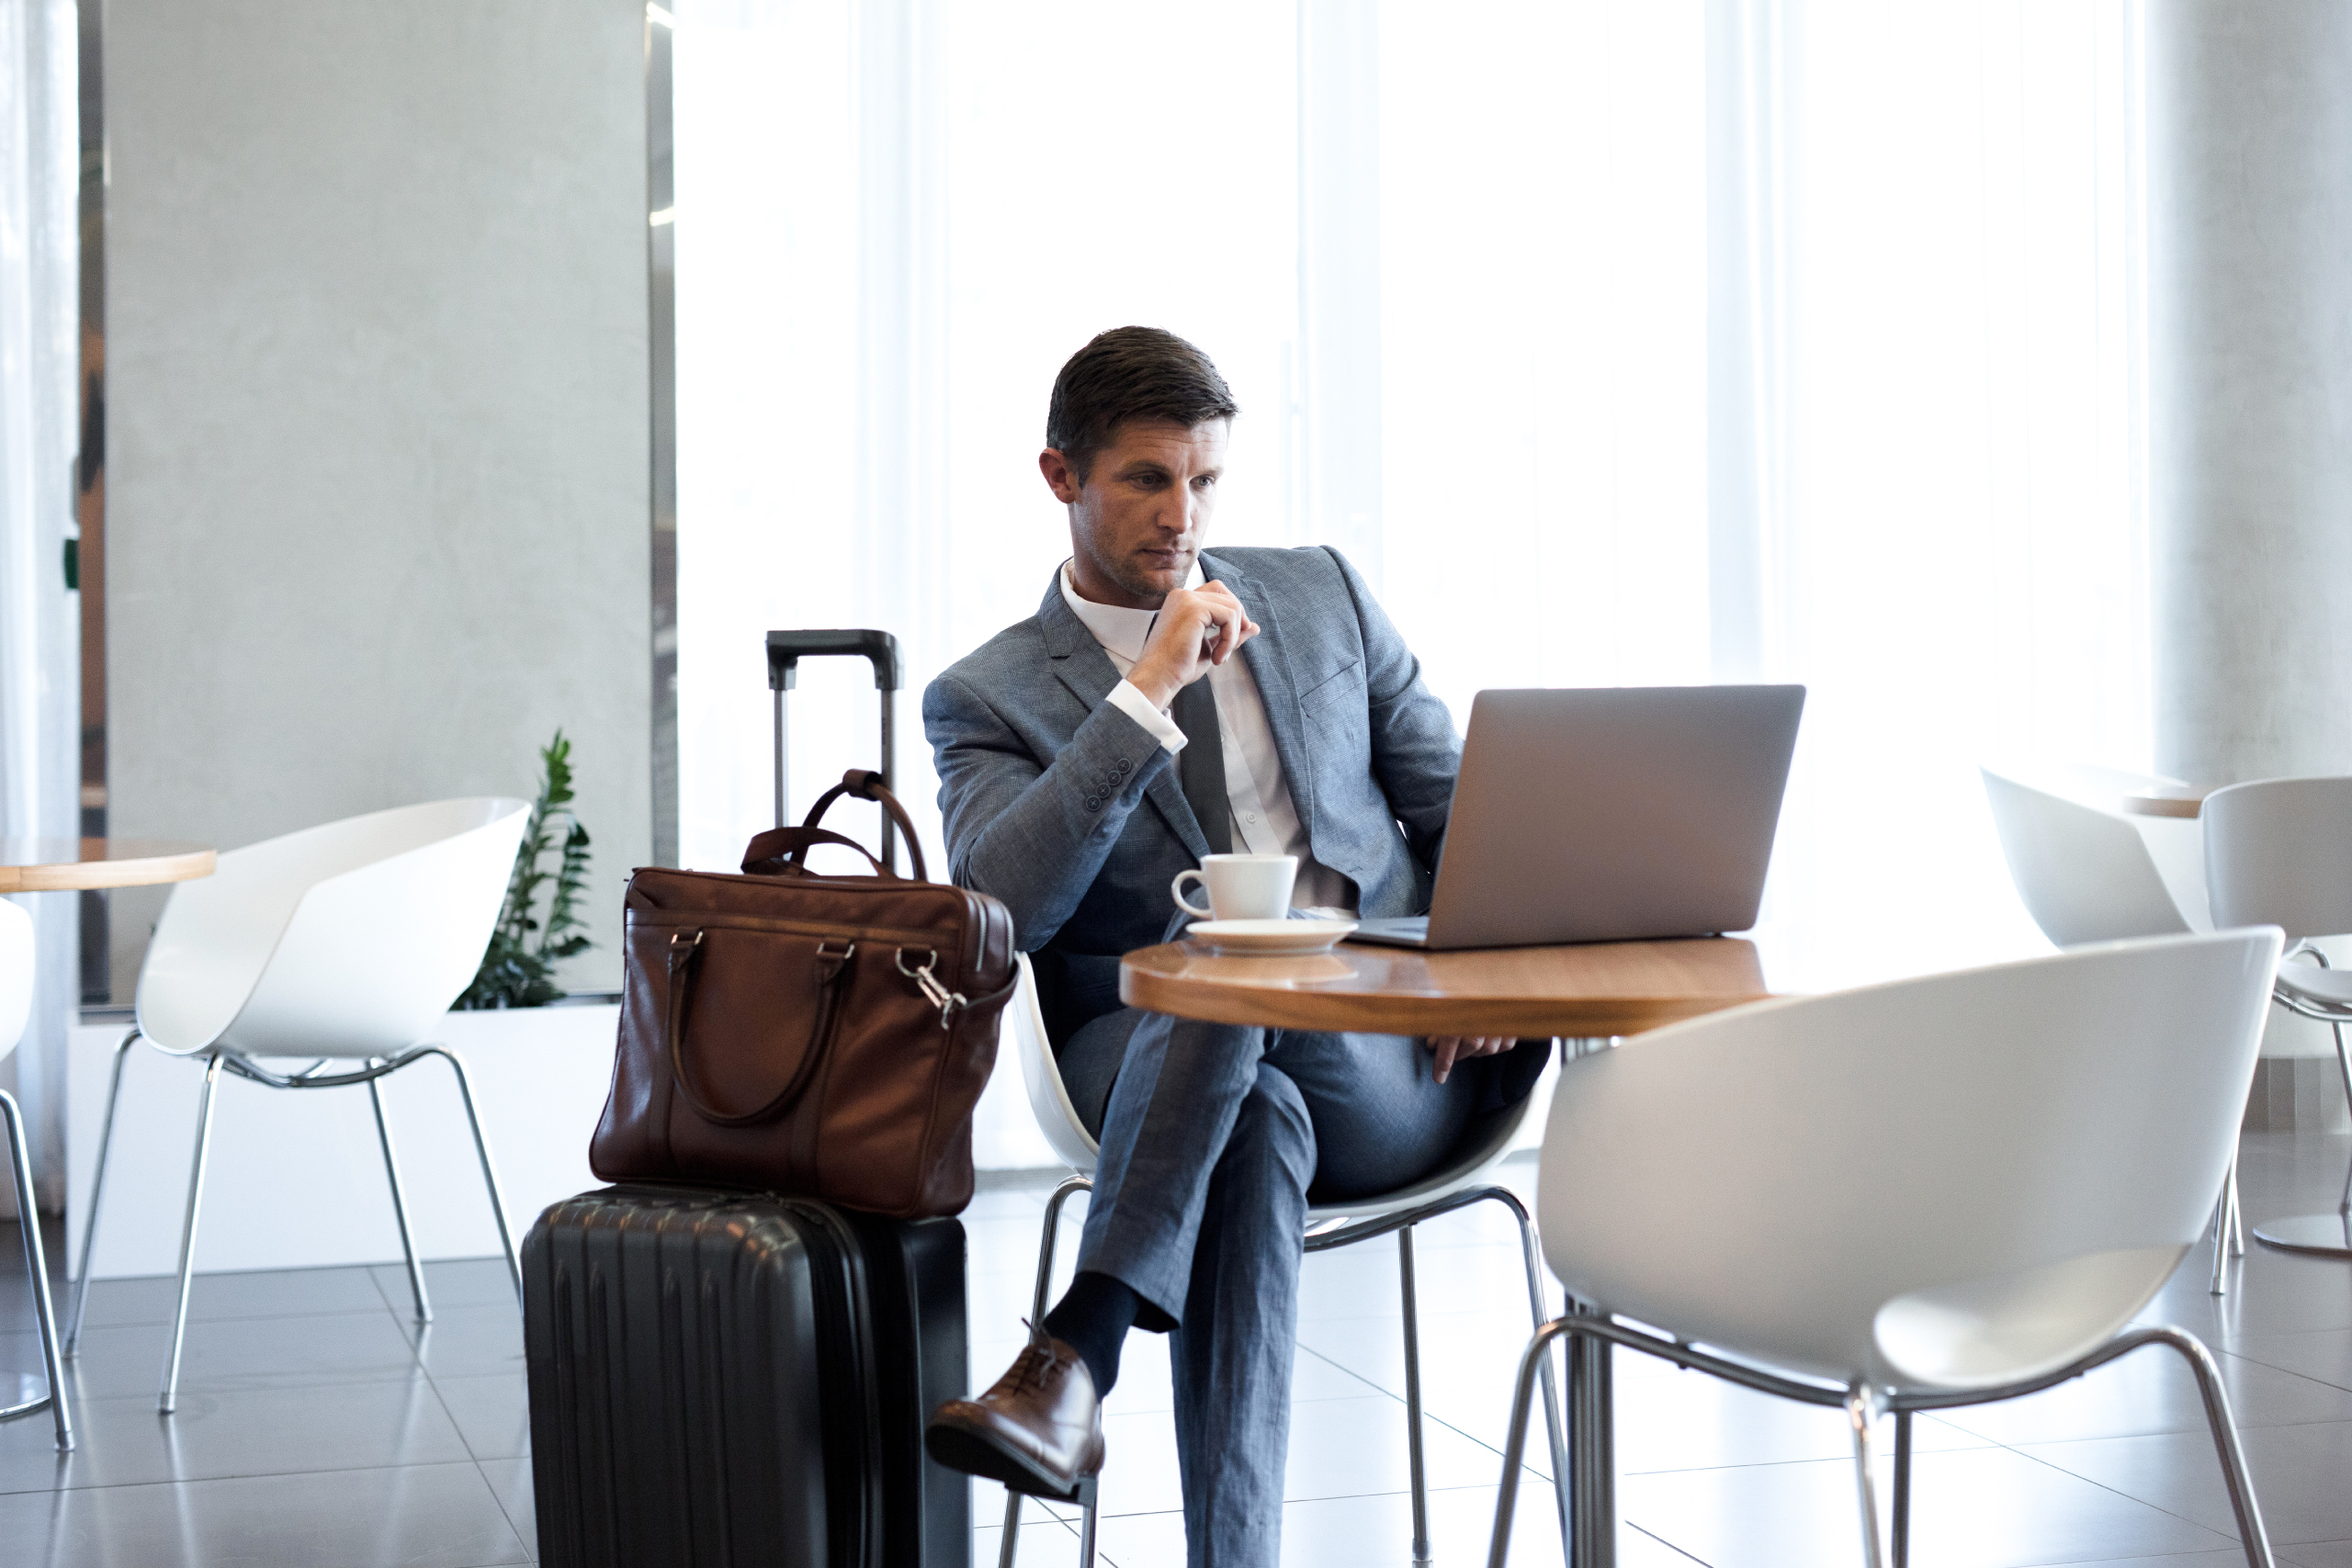 5 Domestic Travel Tips for Your Next Business Trip